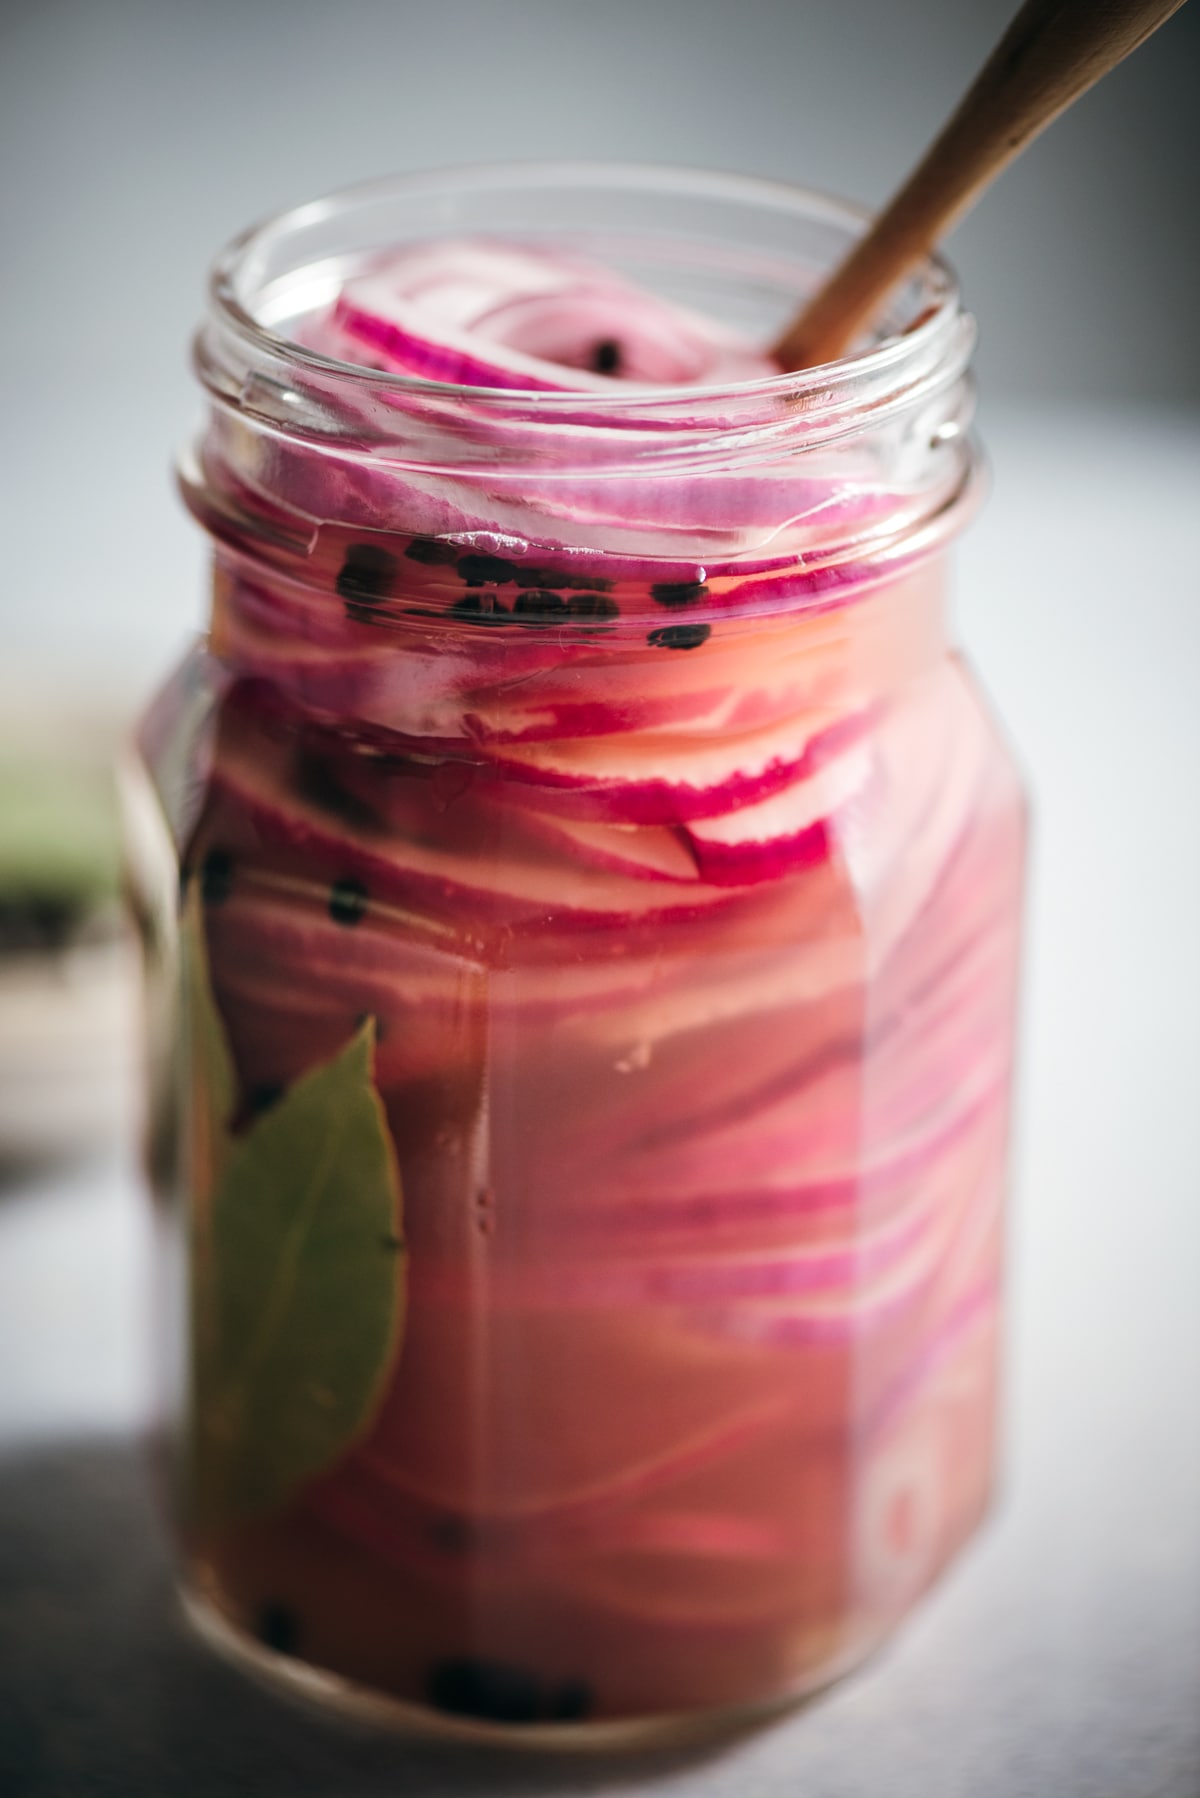 Jar of preserved red onions